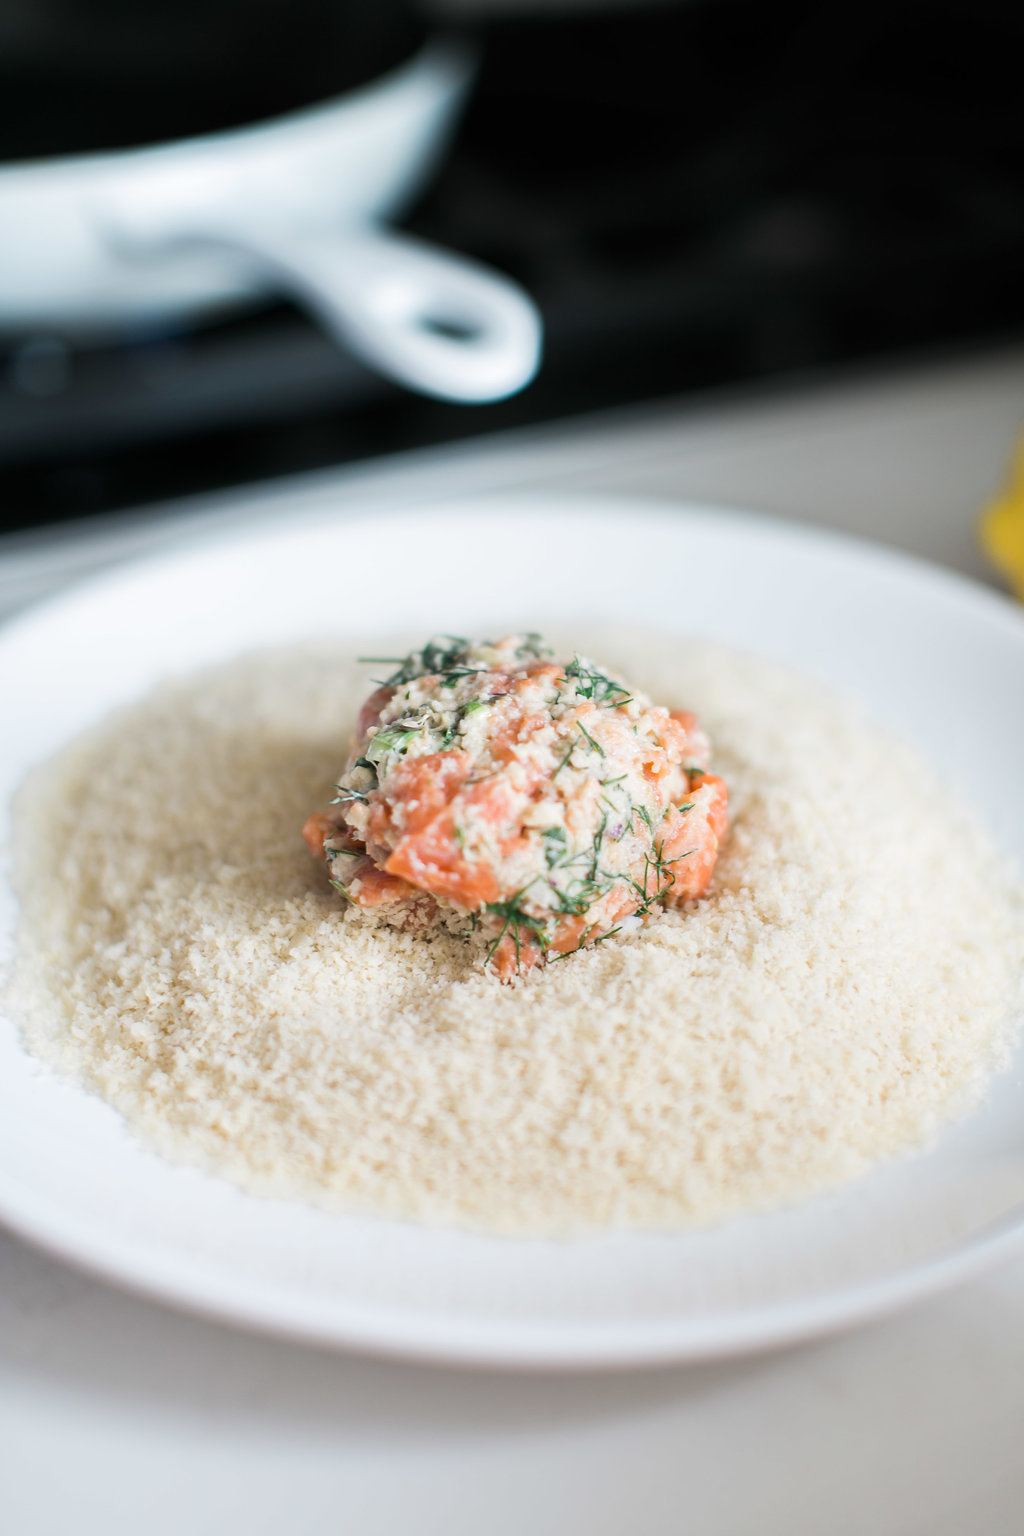 The BEST salmon cakes you will ever eat, made with smoked and fresh salmon and topped with an addictive homemade dill tartar sauce by Fraiche Nutrition.